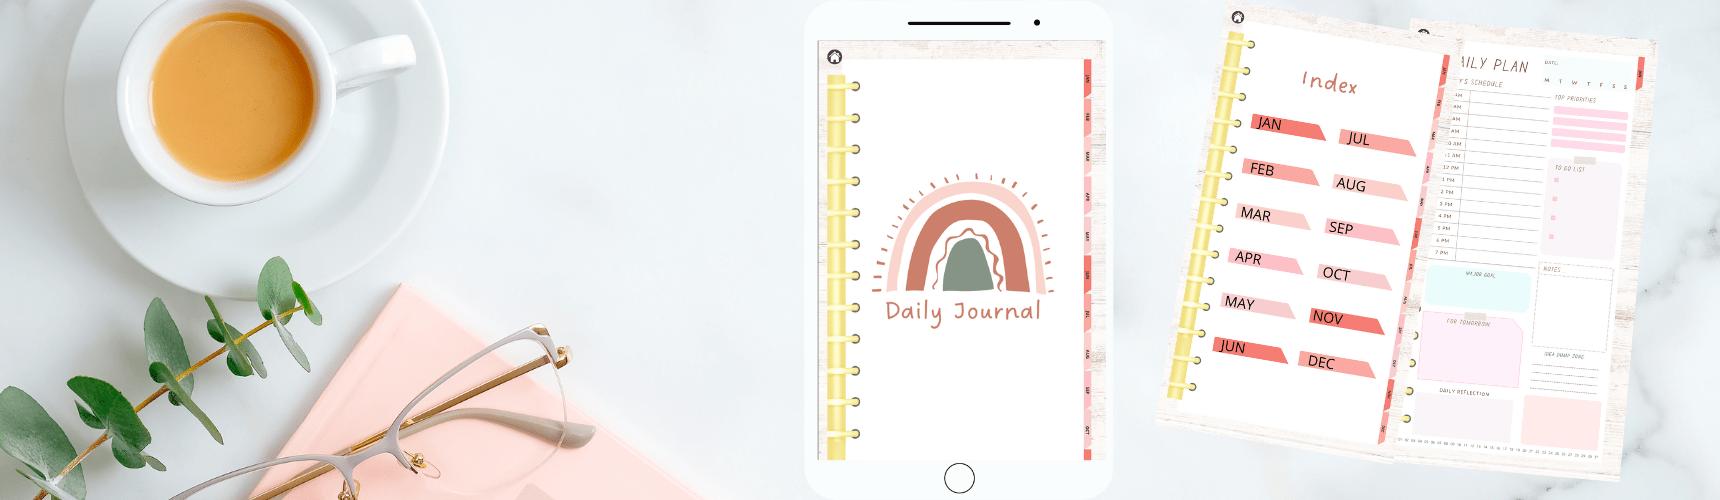 Health Mind Body - Daily Planner